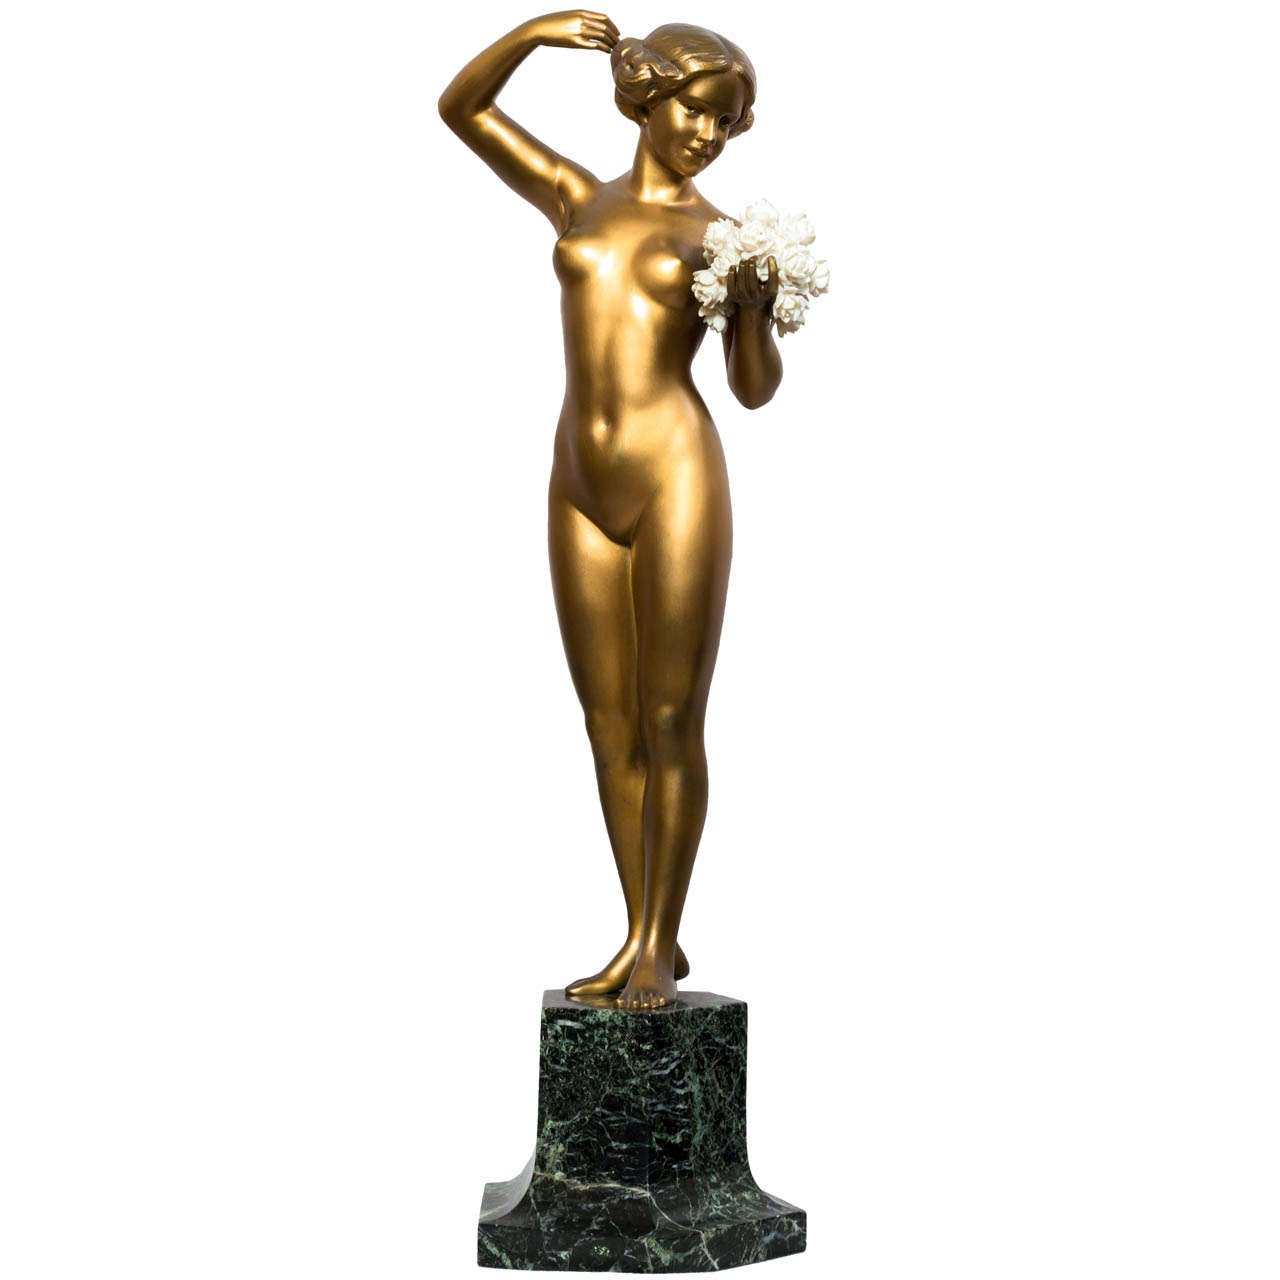 Bronze and Ivory Nude Statue, Signed "Poertzel"